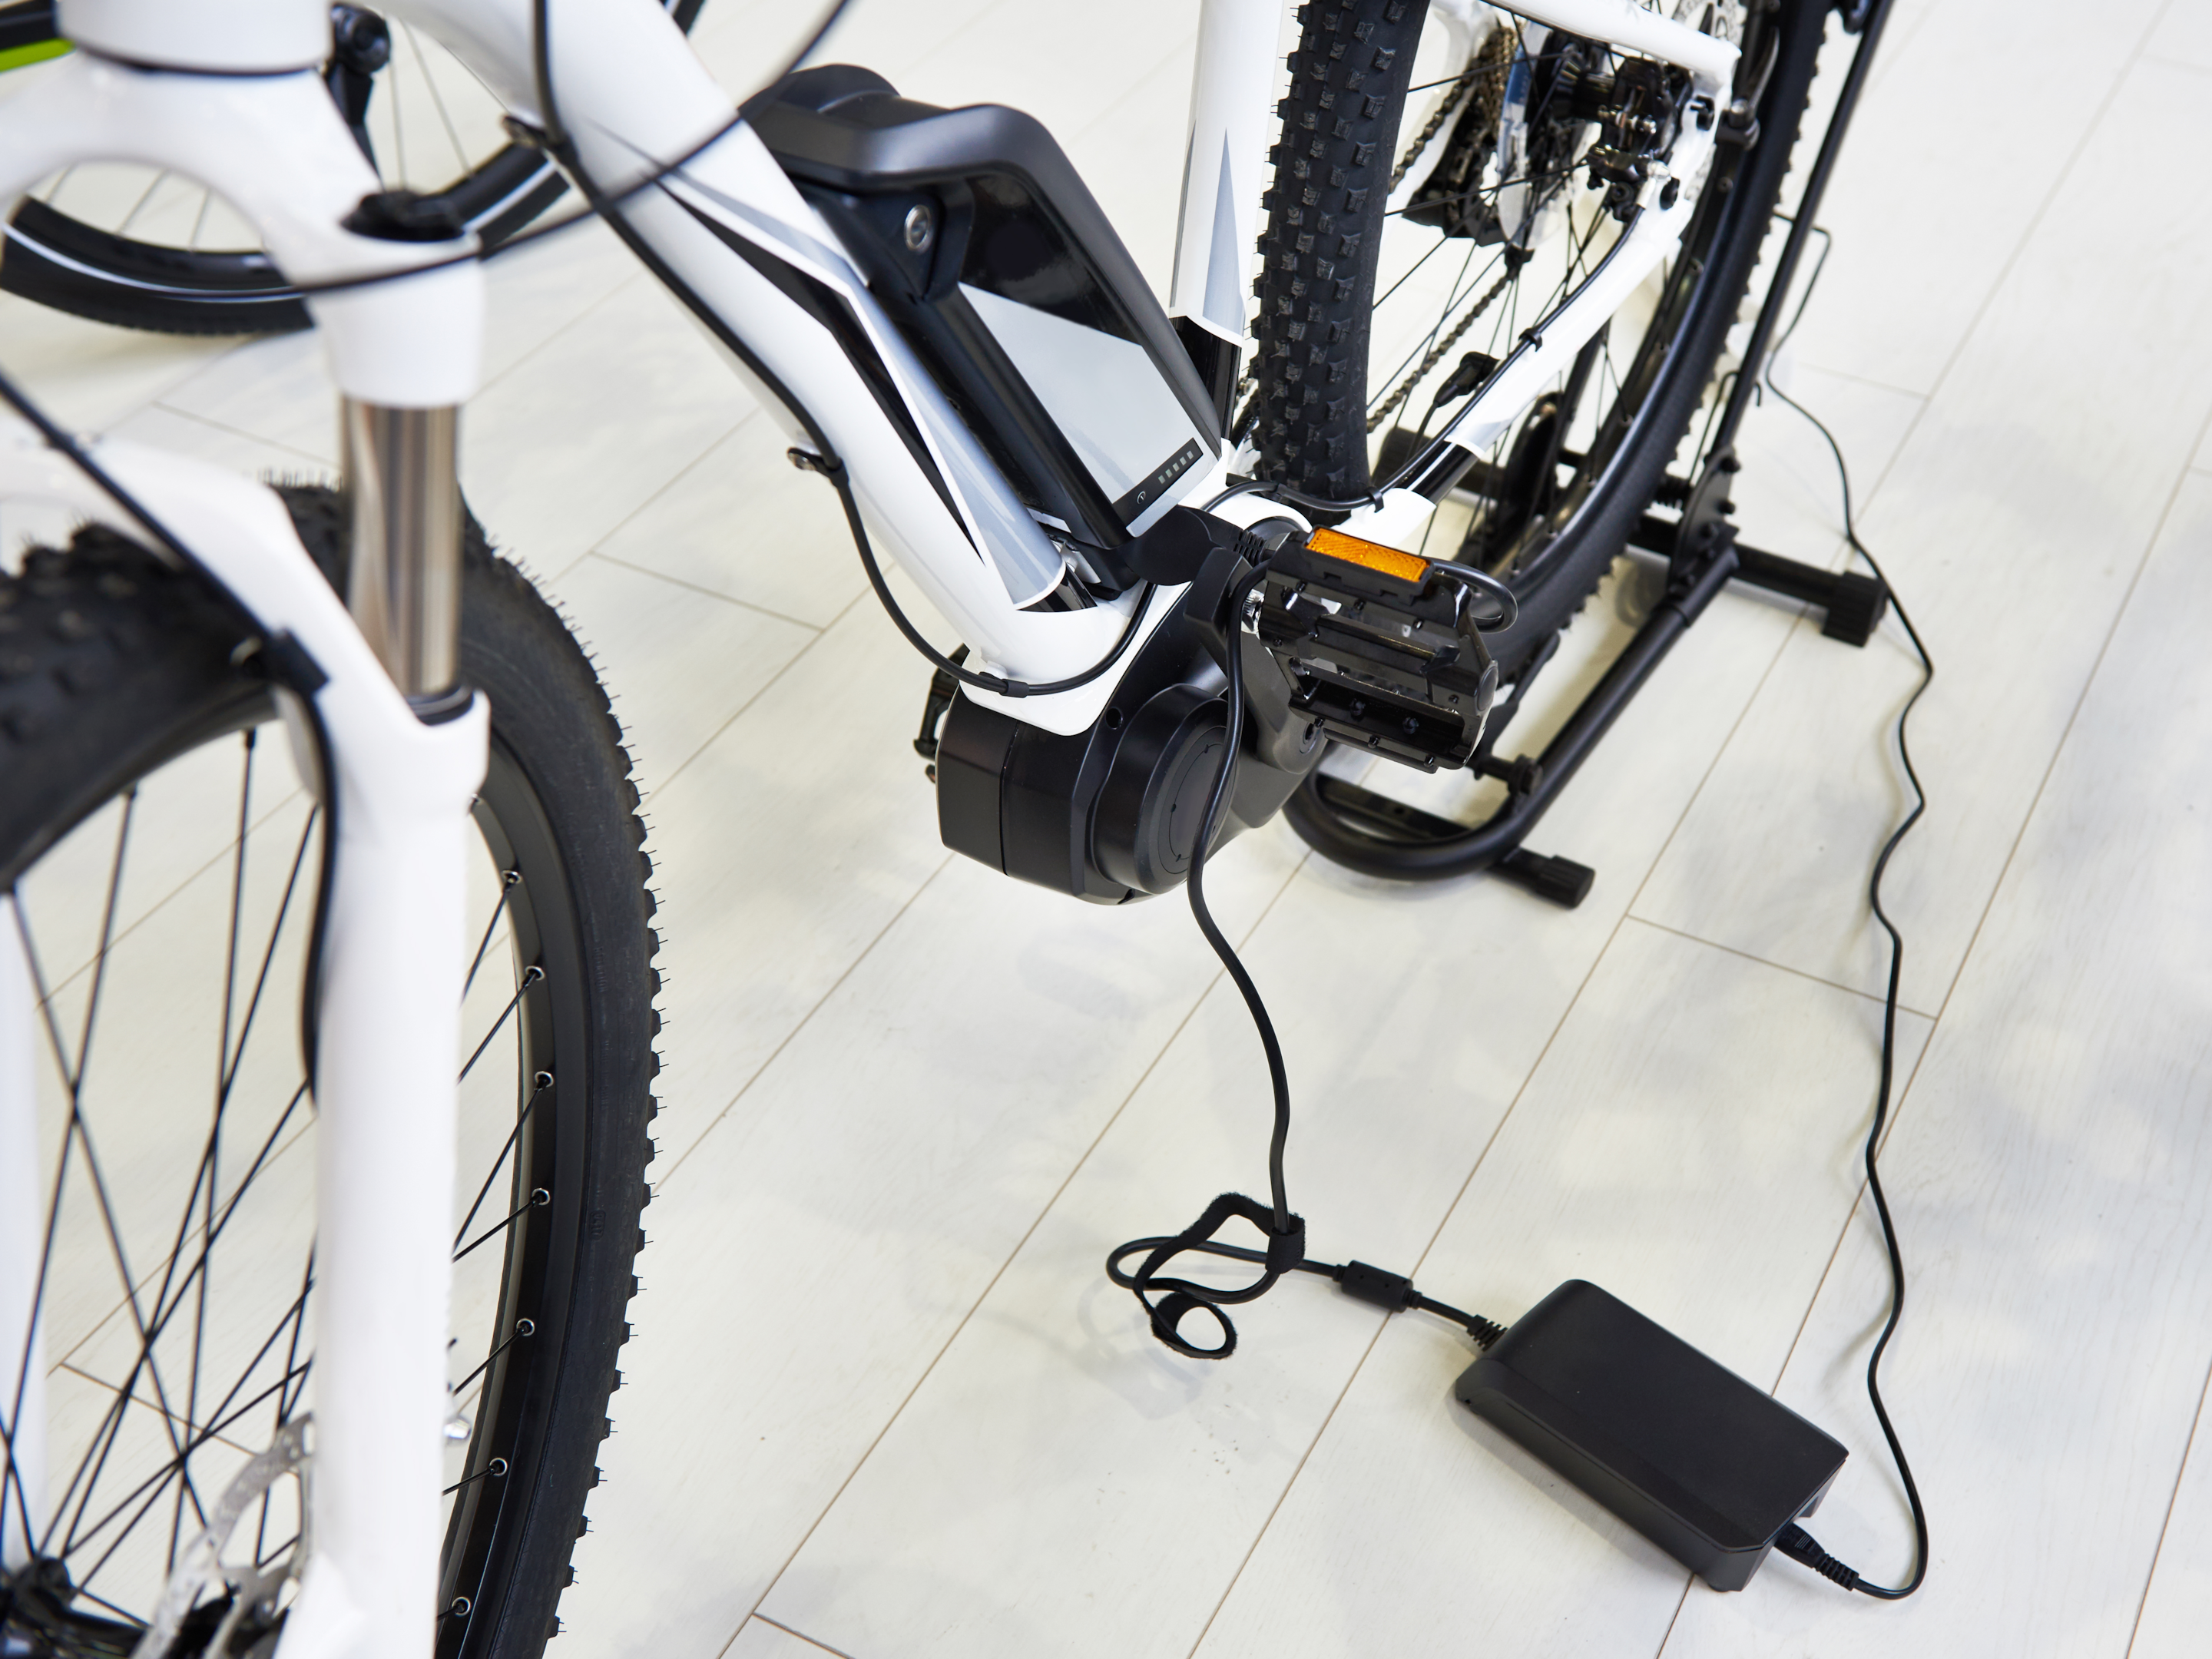 Electric bike with battery charger plugged in